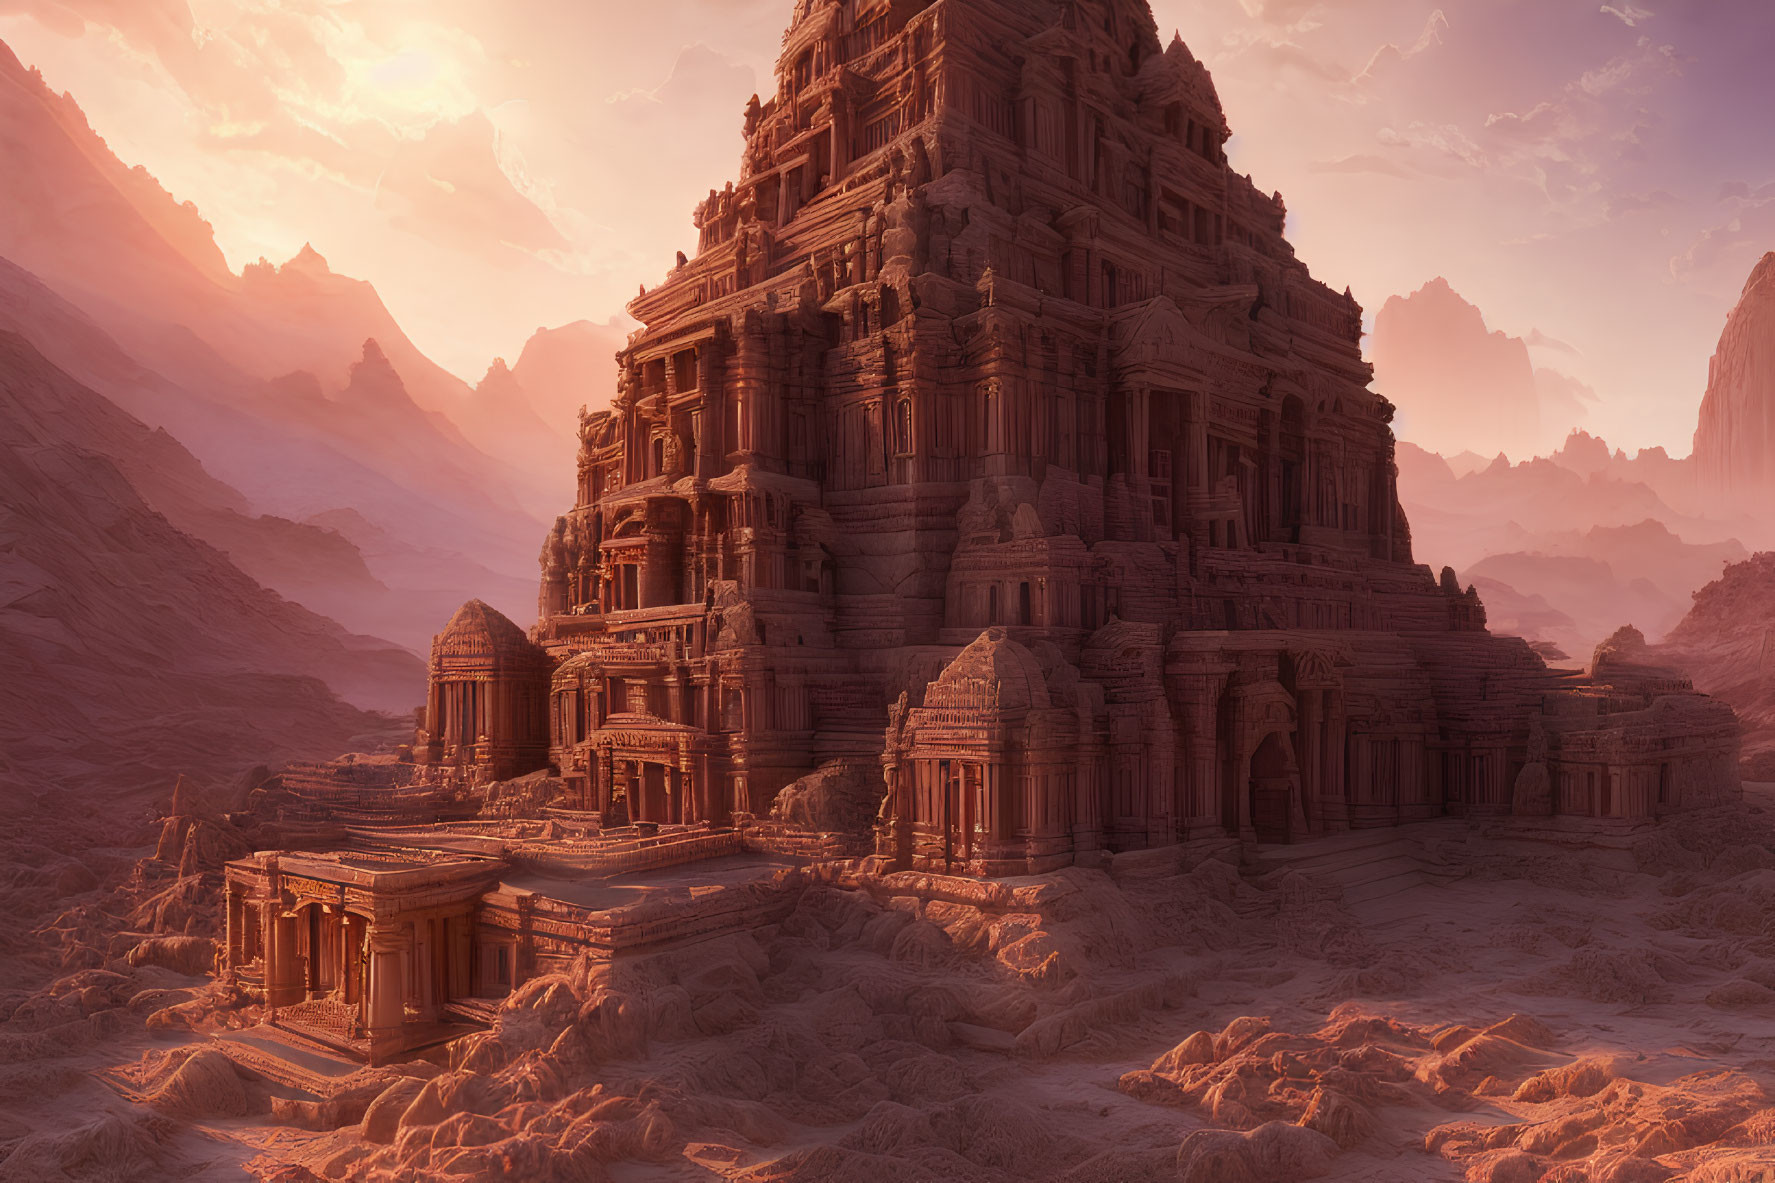 Ornate desert temple complex with towering rocks at dusk